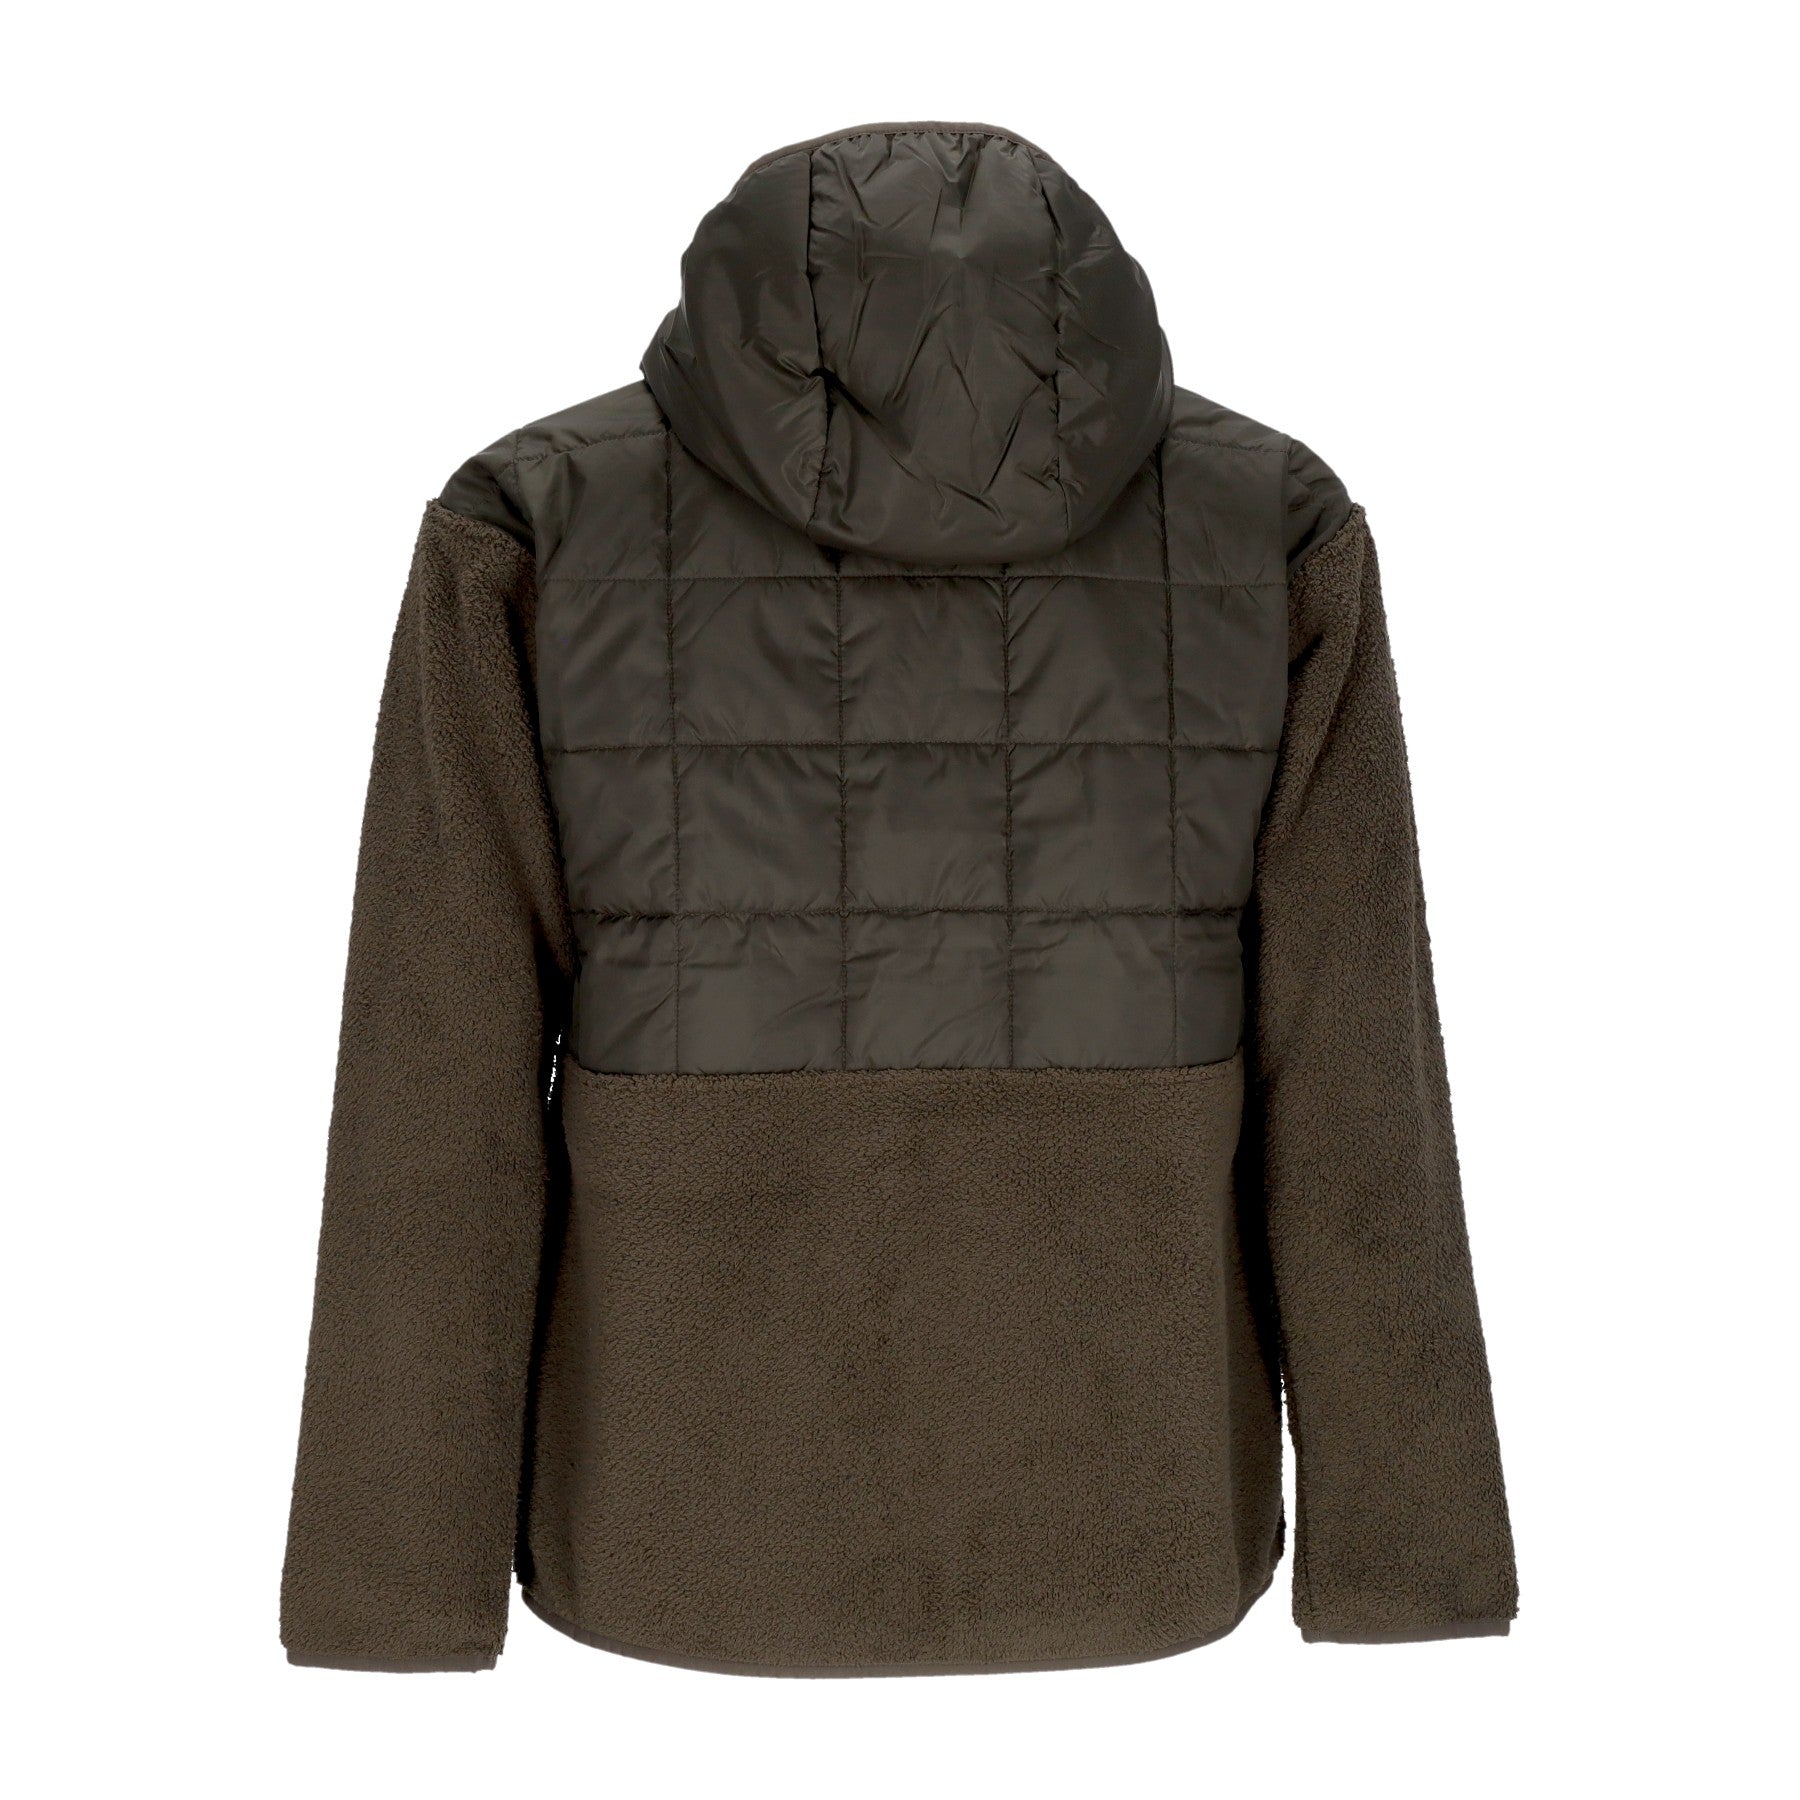 Cotopaxi, Orsetto Uomo Trico Hybrid Hooded Jacket, 